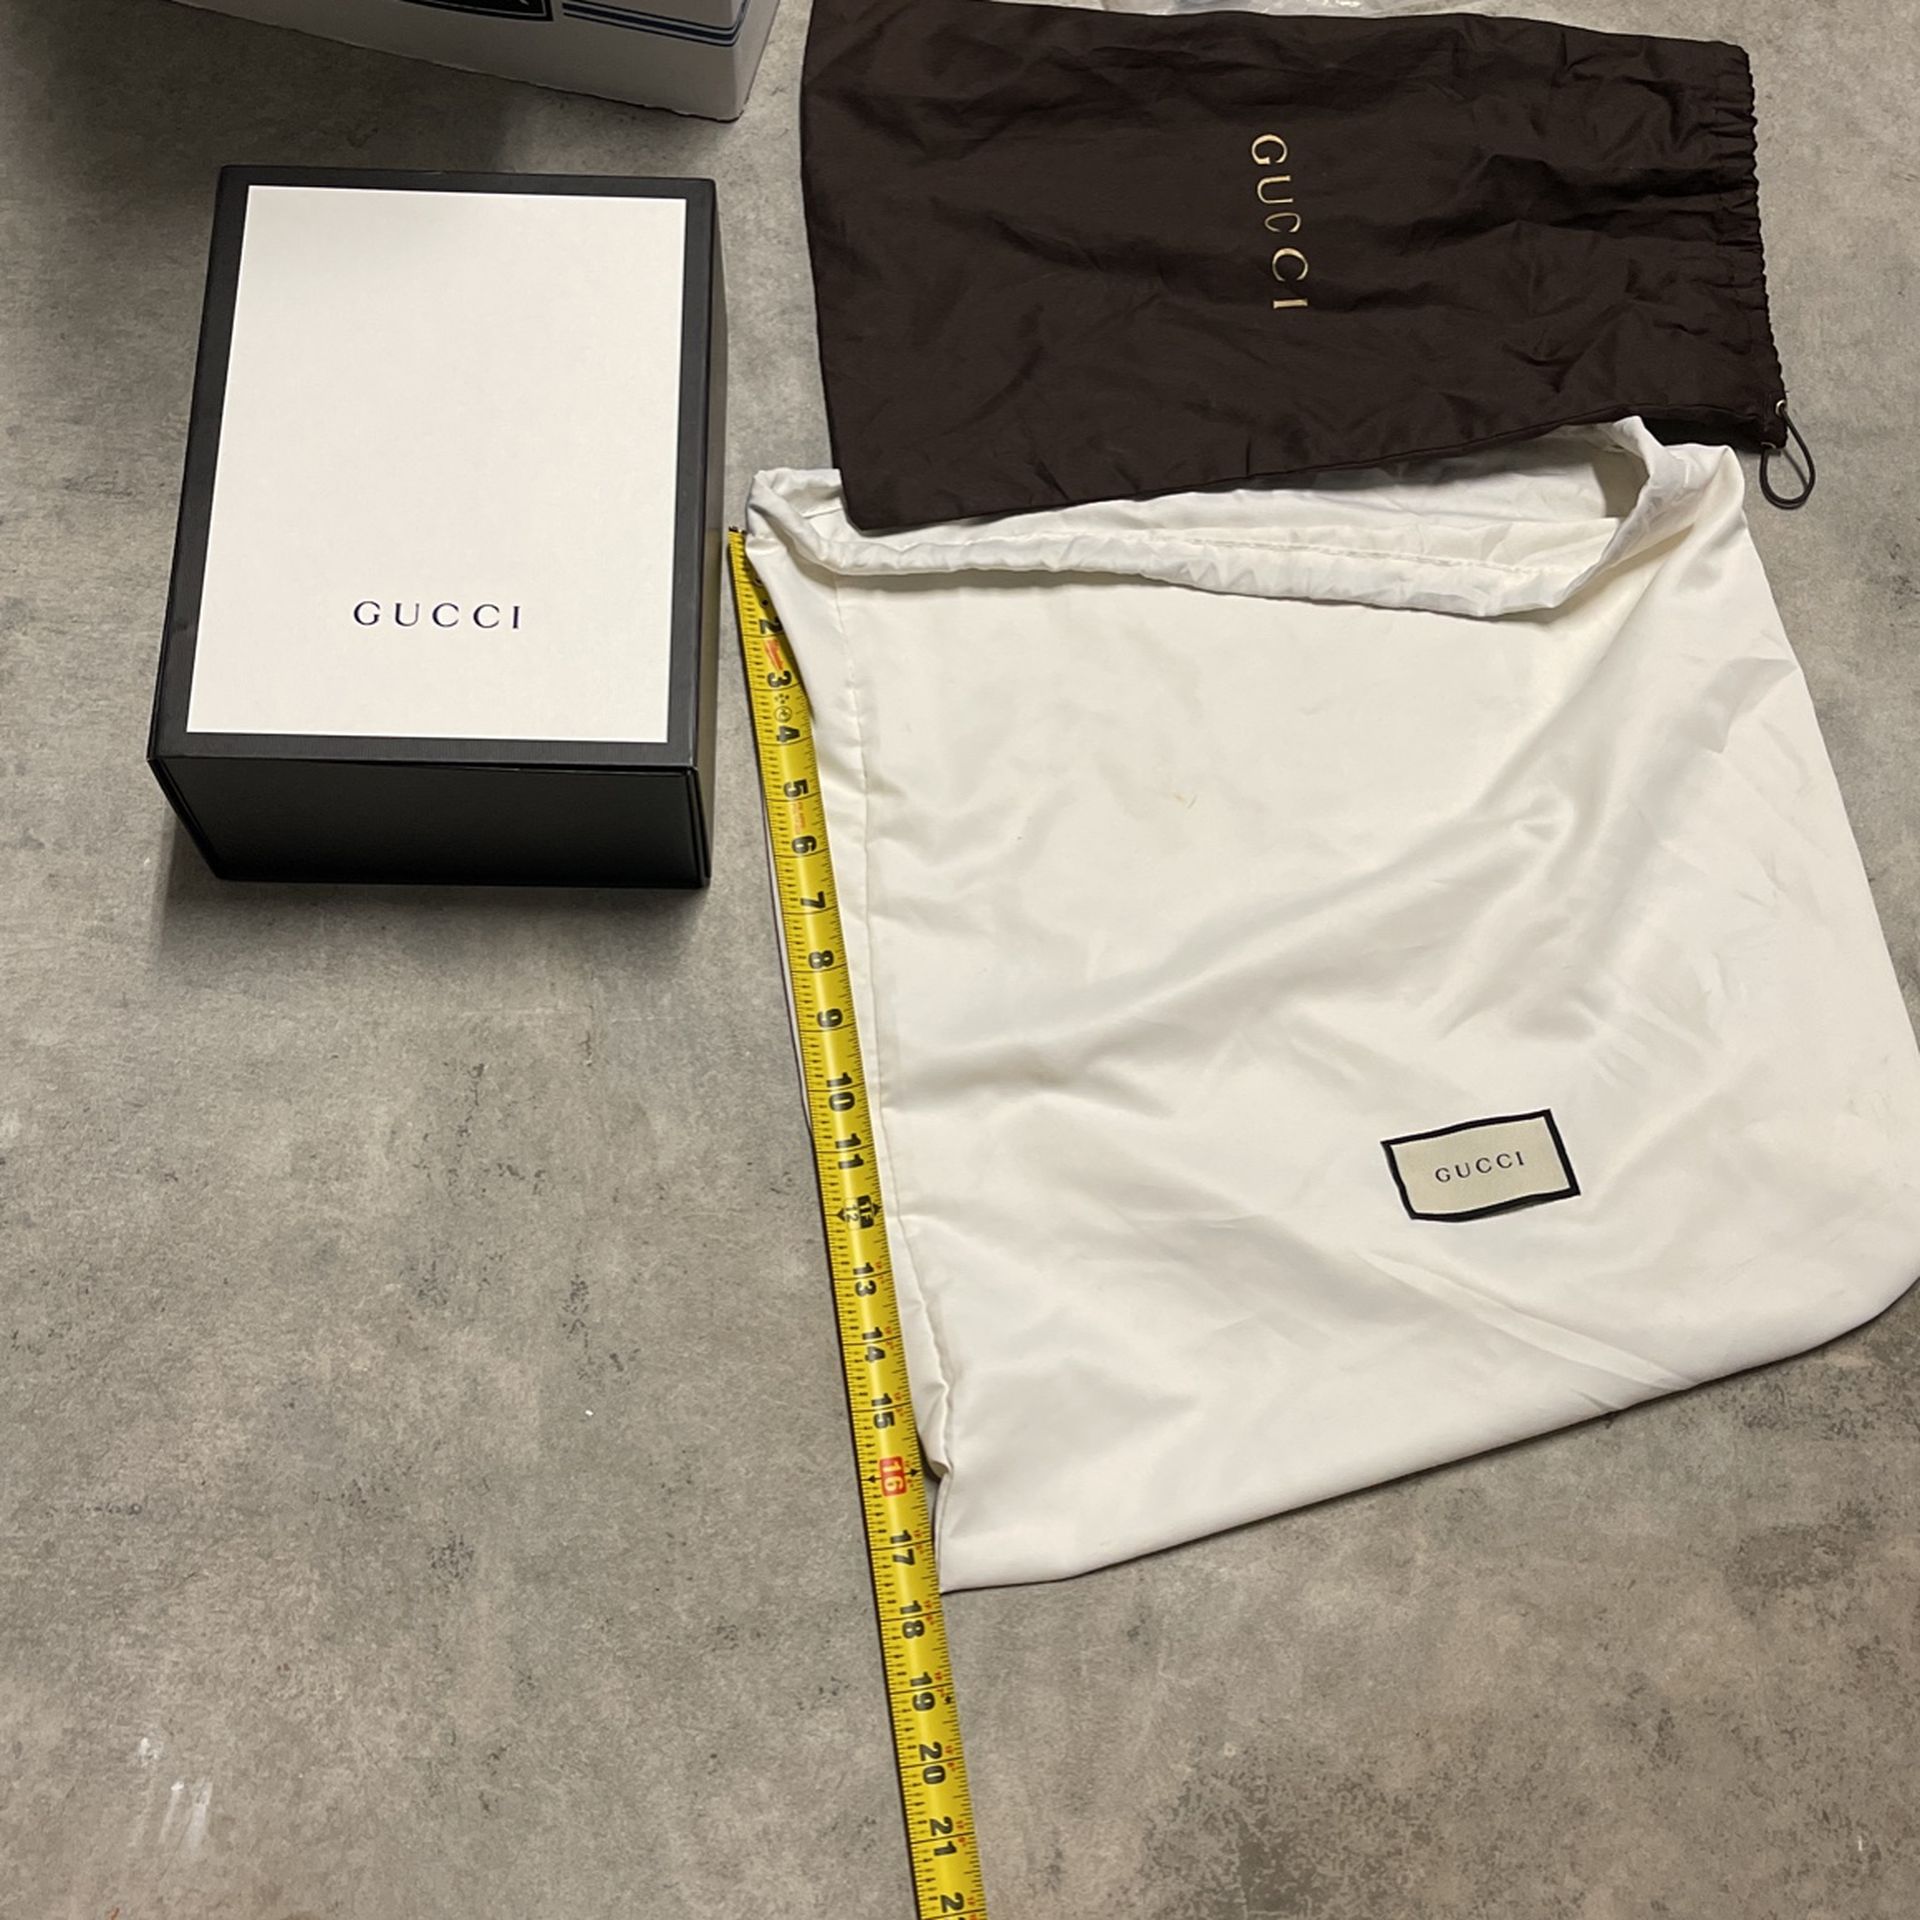 Gucci Dust Bags And Purse/clutch Box